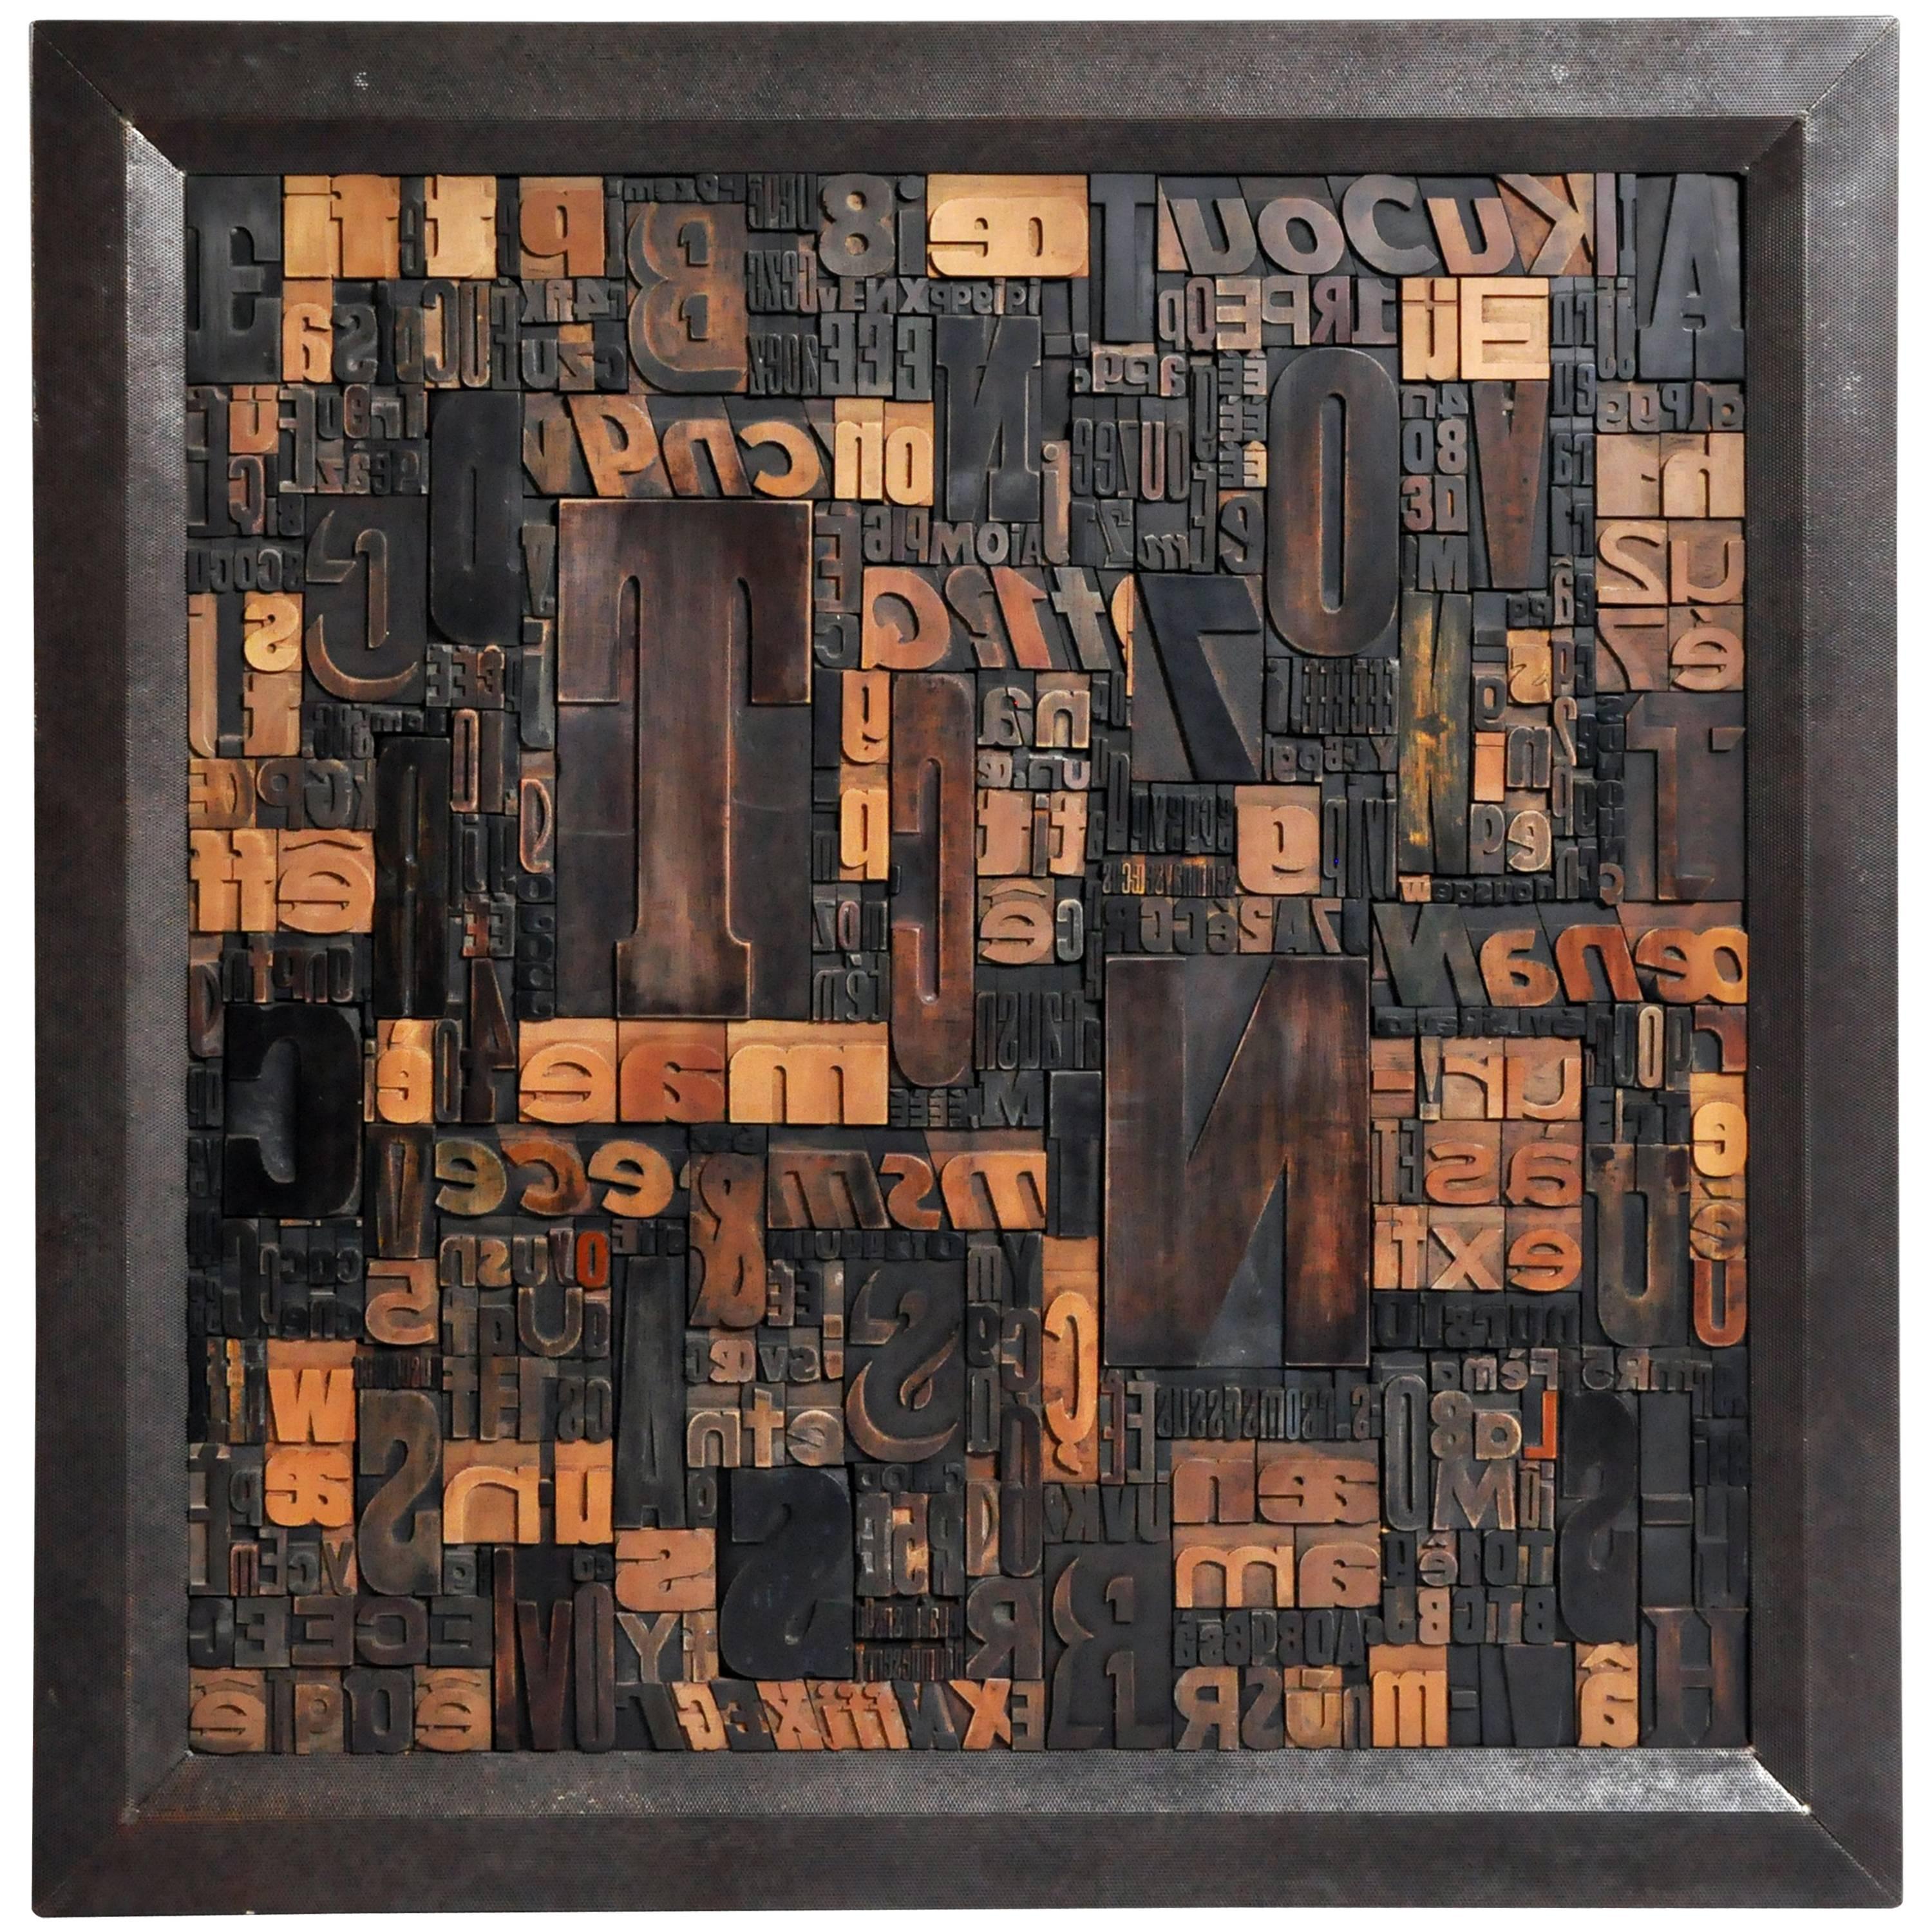 "Les Lettres" Contemporary Art Work by Raoul W.